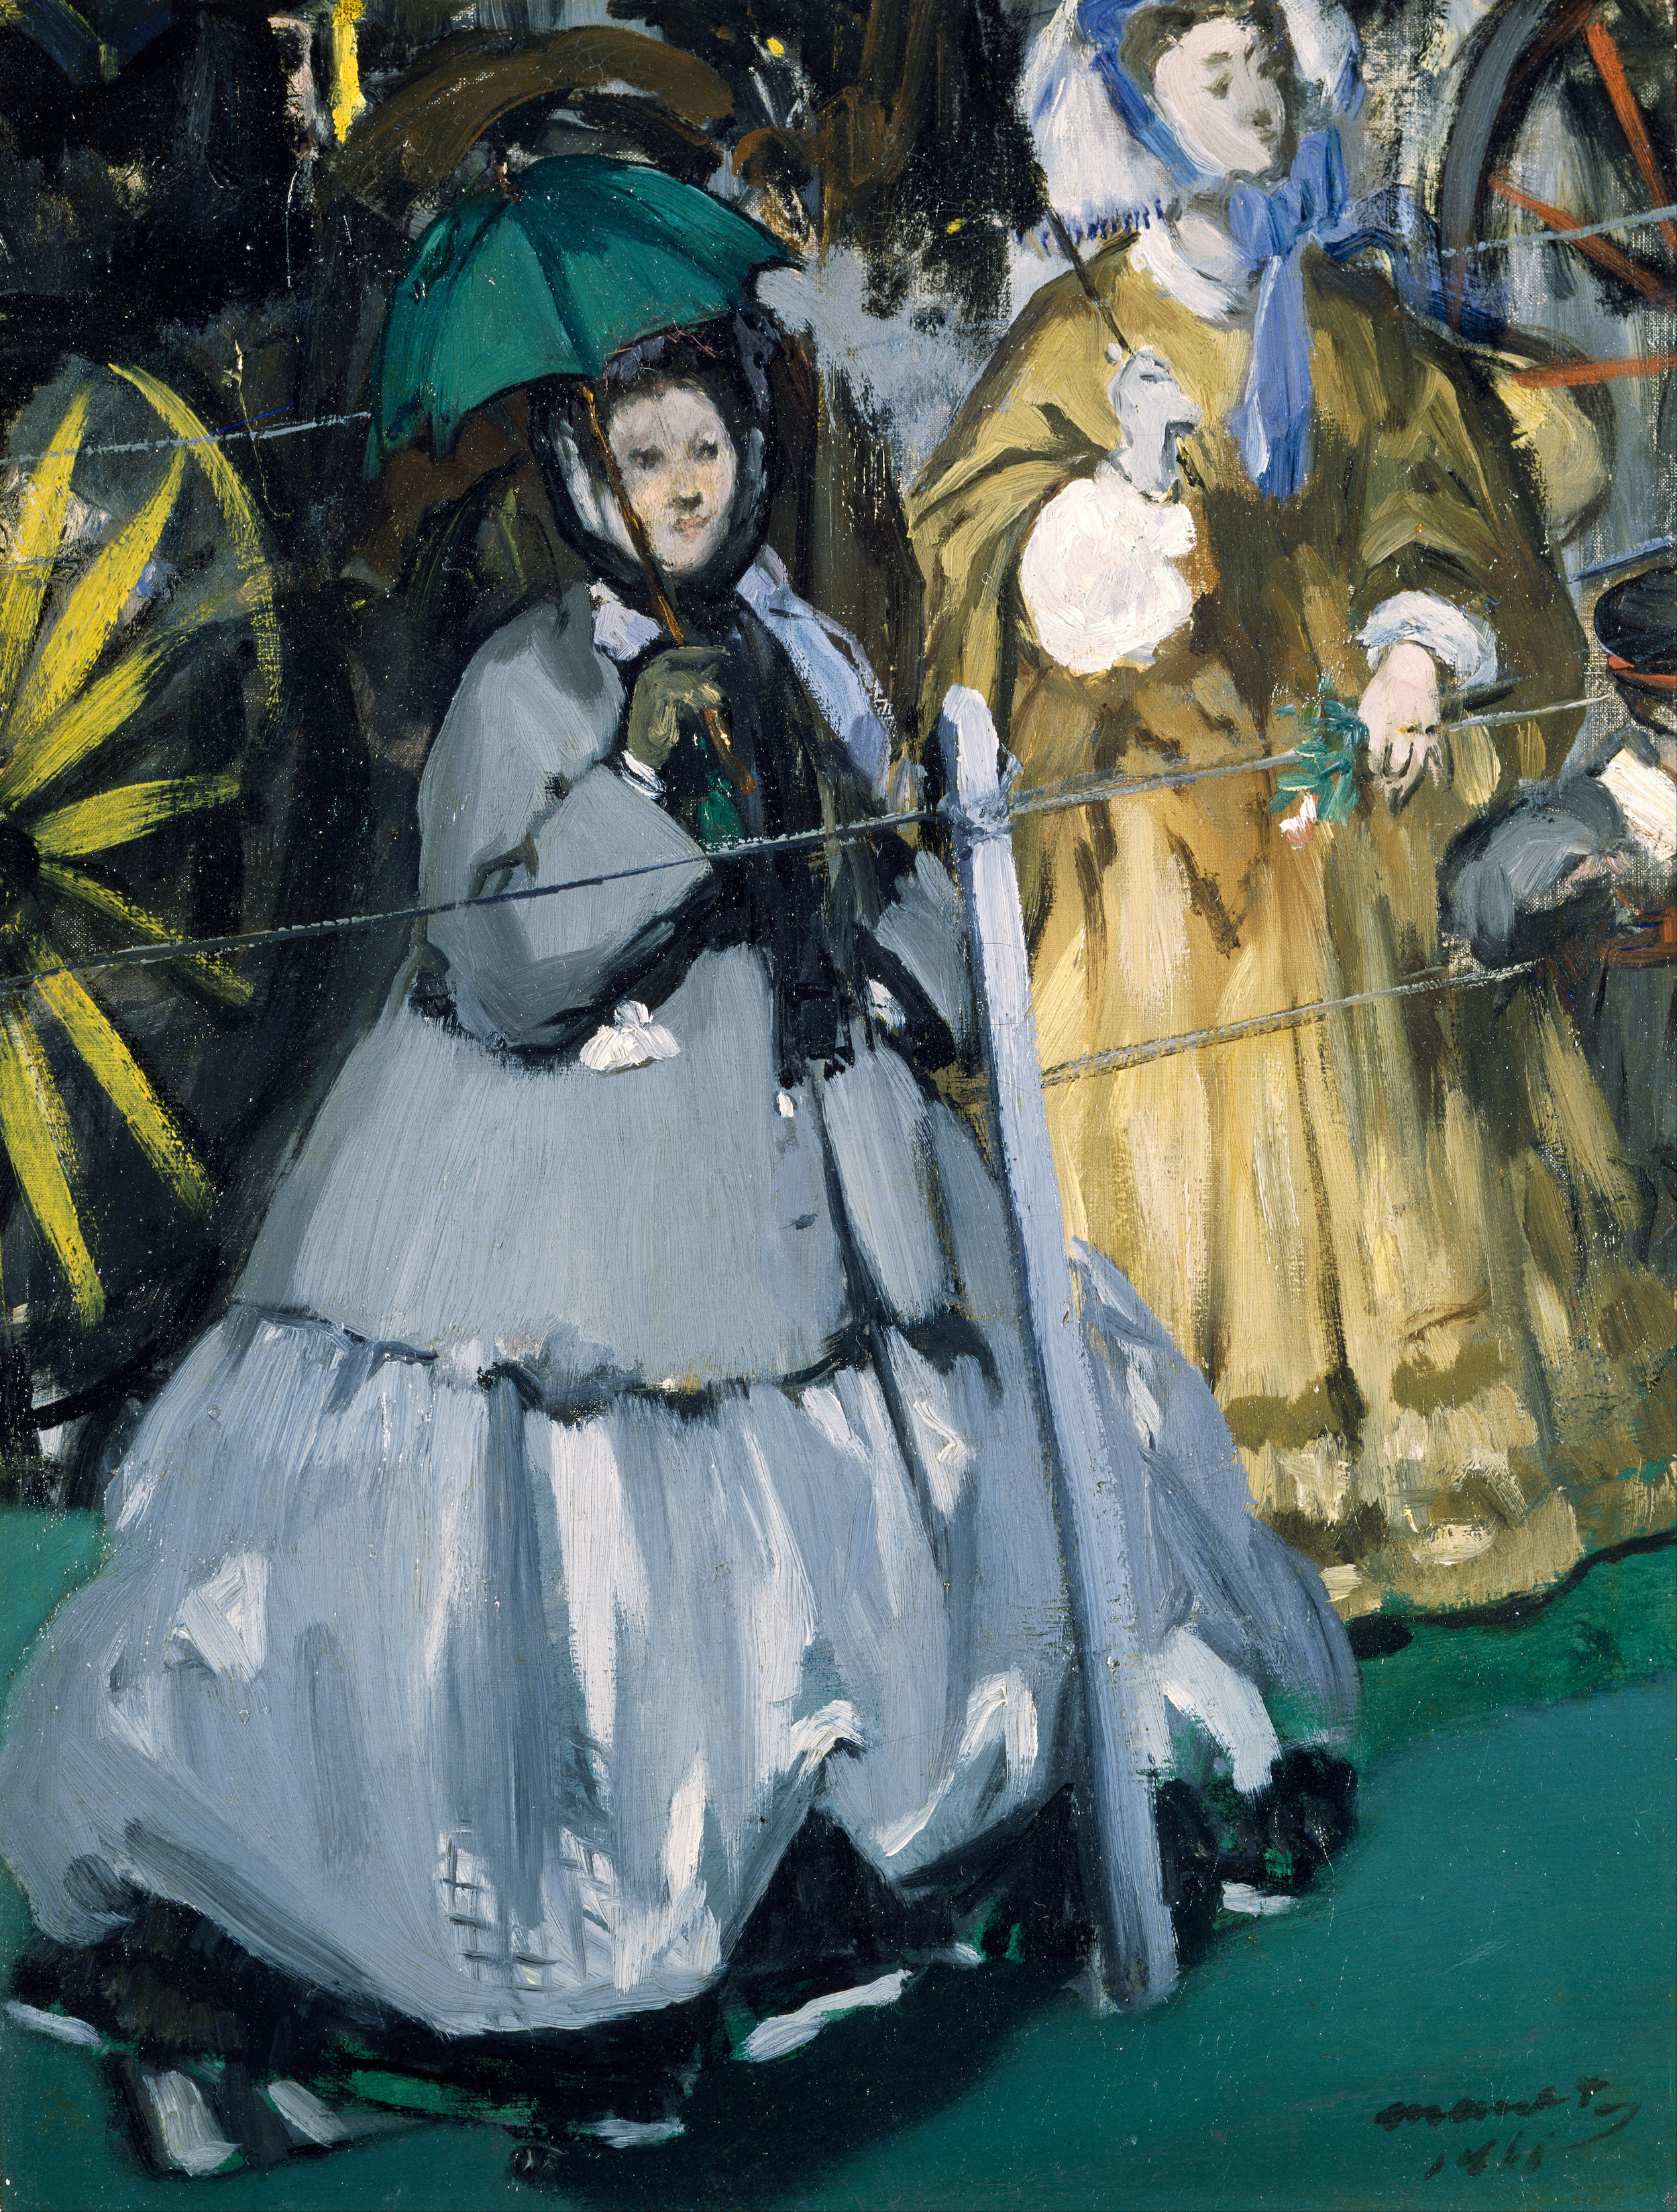 Women at the Races by Edouard Manet - 1866 - 42.2 x 32.1 cm 